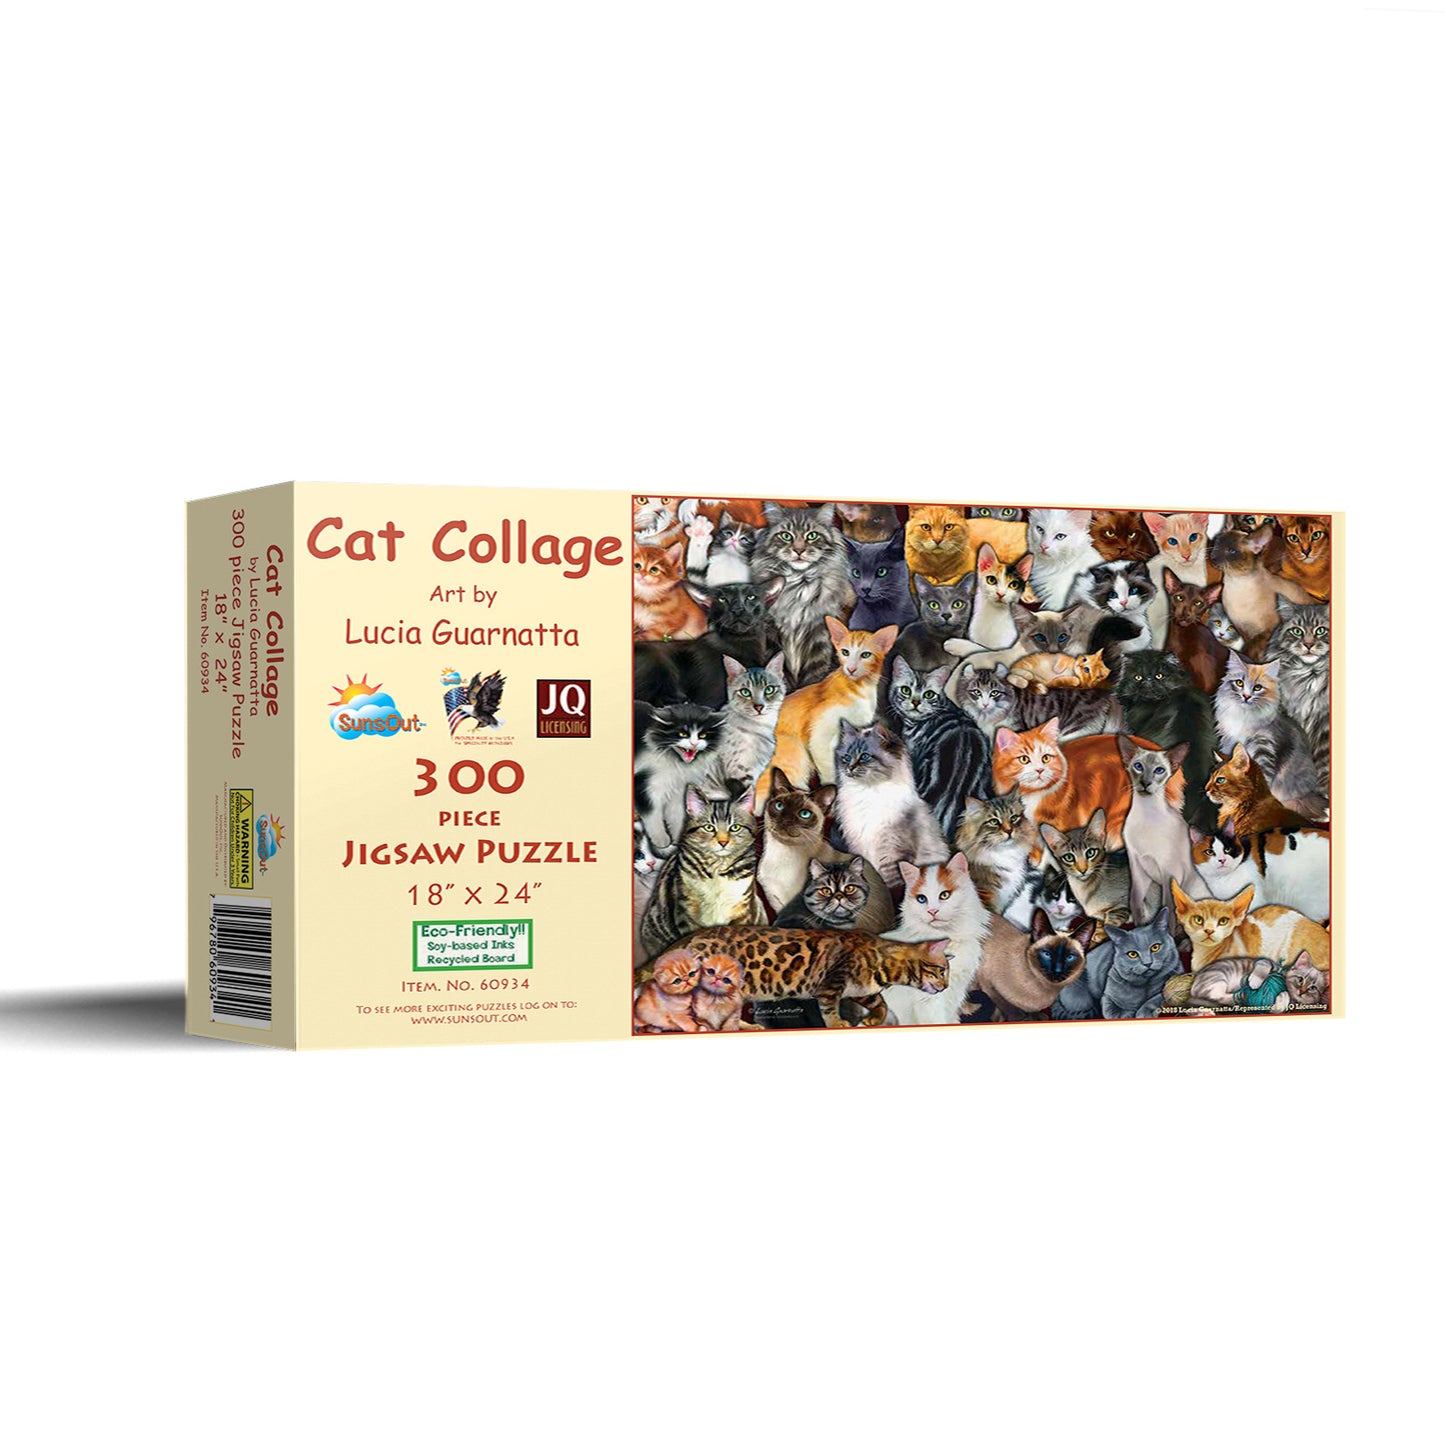 Cat Collage - 300 Piece Jigsaw Puzzle